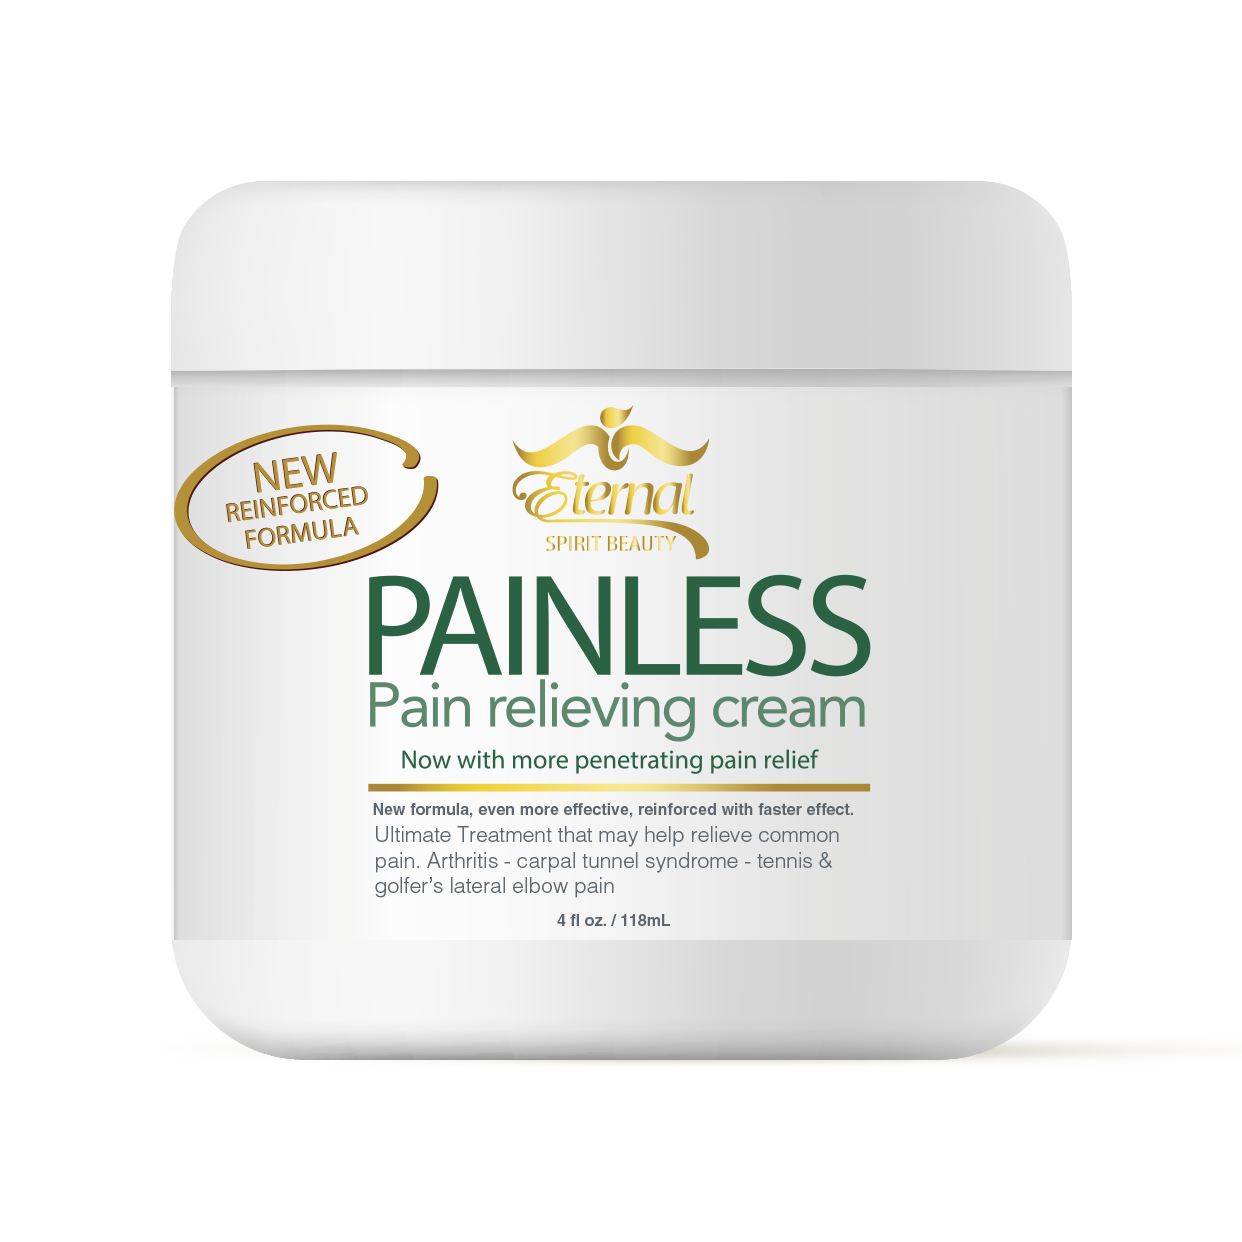 Painless | Pain relieving cream | 4fl oz/118ml